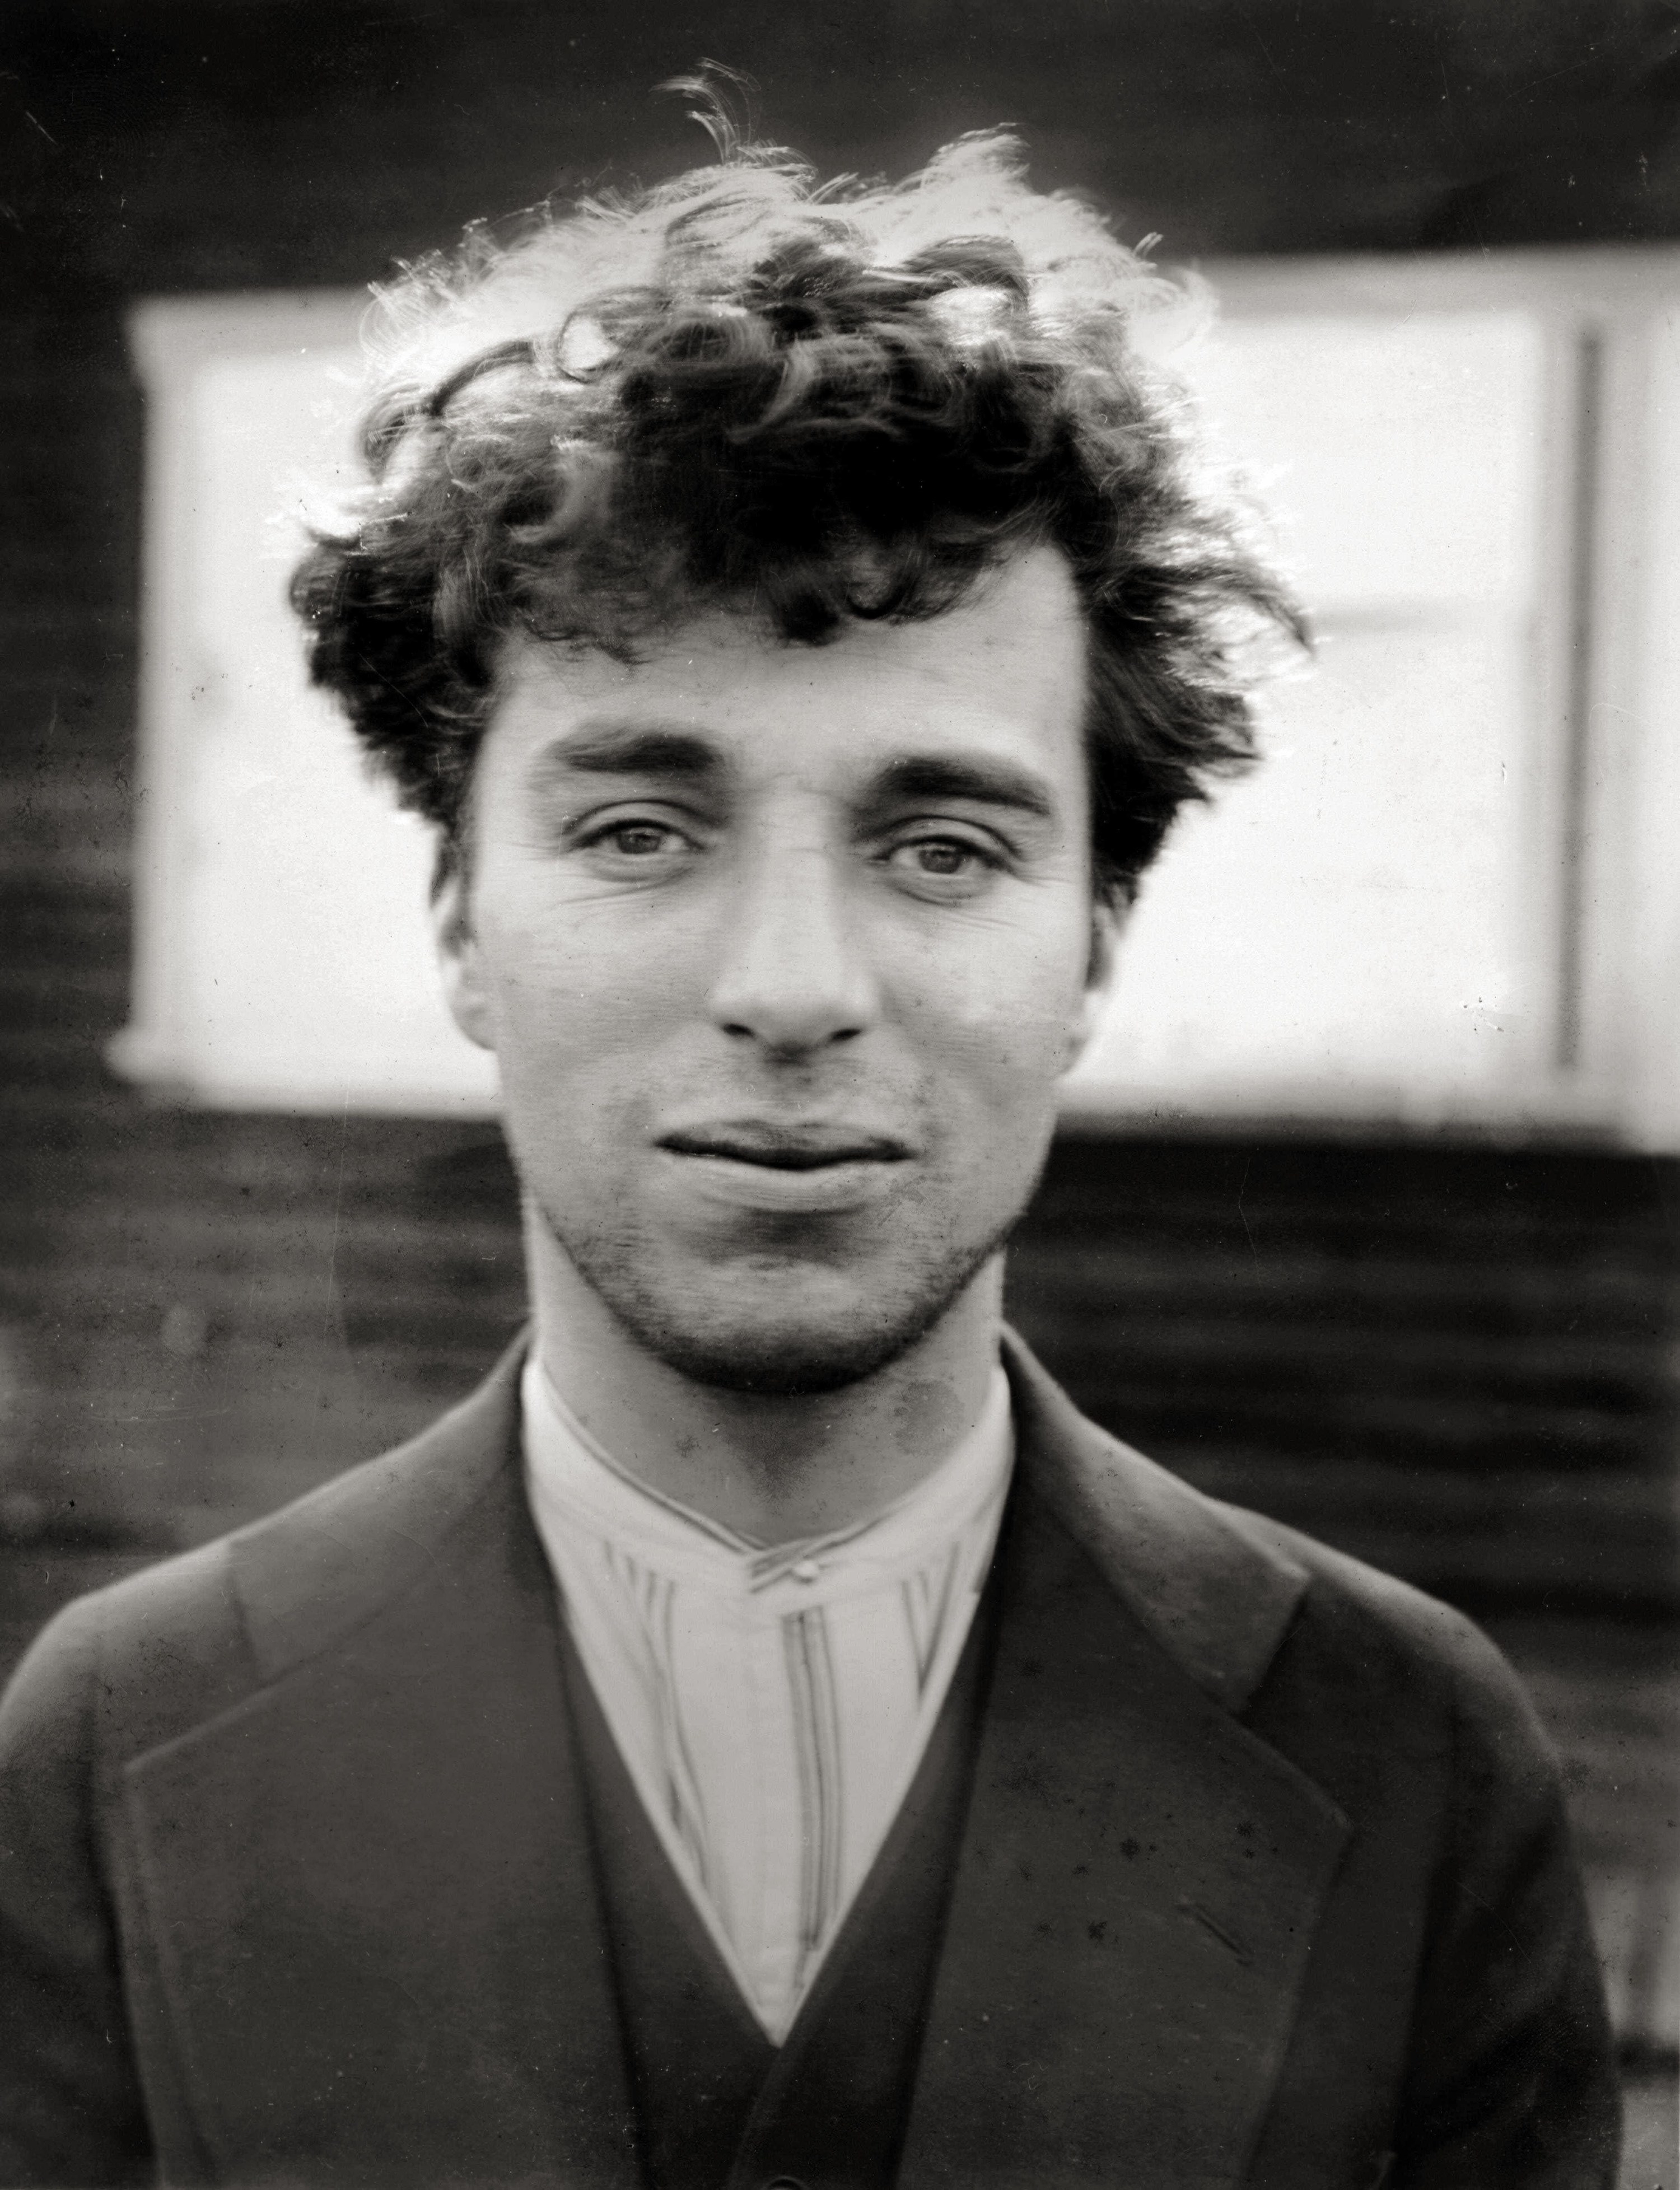 Black-and-white close-up of a man with curly hair